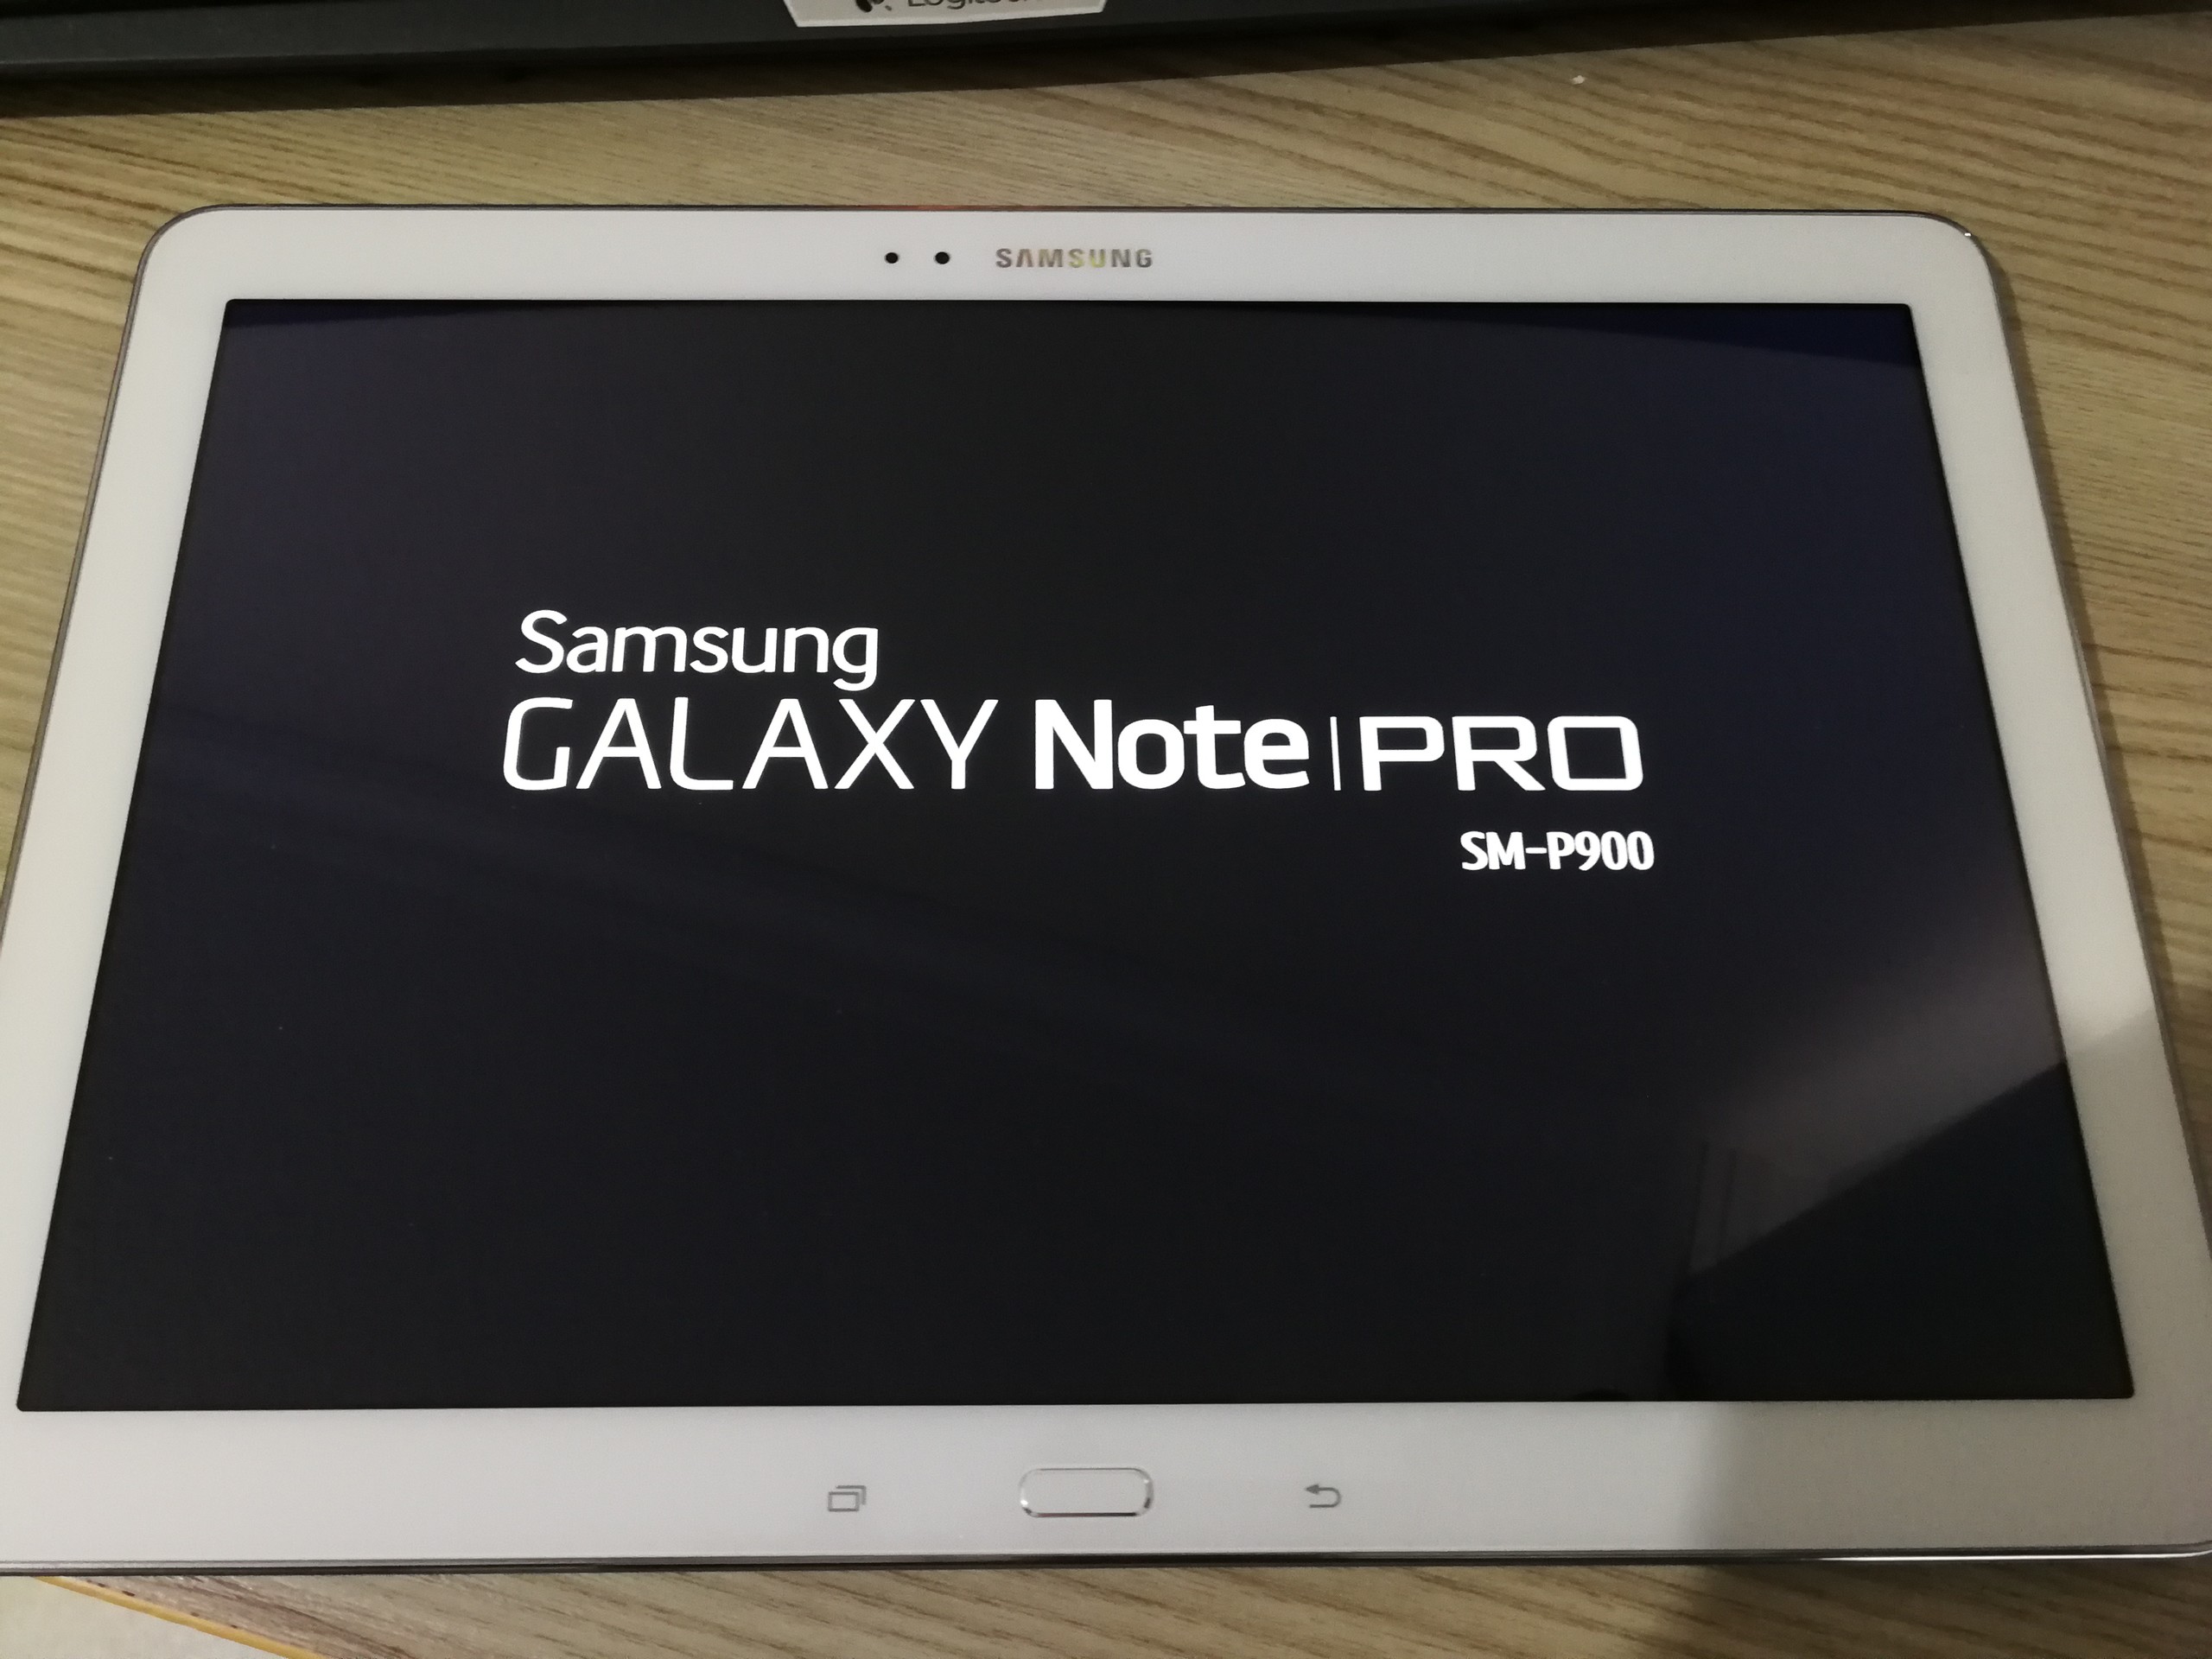 Galaxy note pro 12. Samsung Galaxy Note Pro 12. Samsung Galaxy Note Pro 12.2. Samsung Galaxy Note p900. Samsung Galaxy Note 12.2 SM p900.